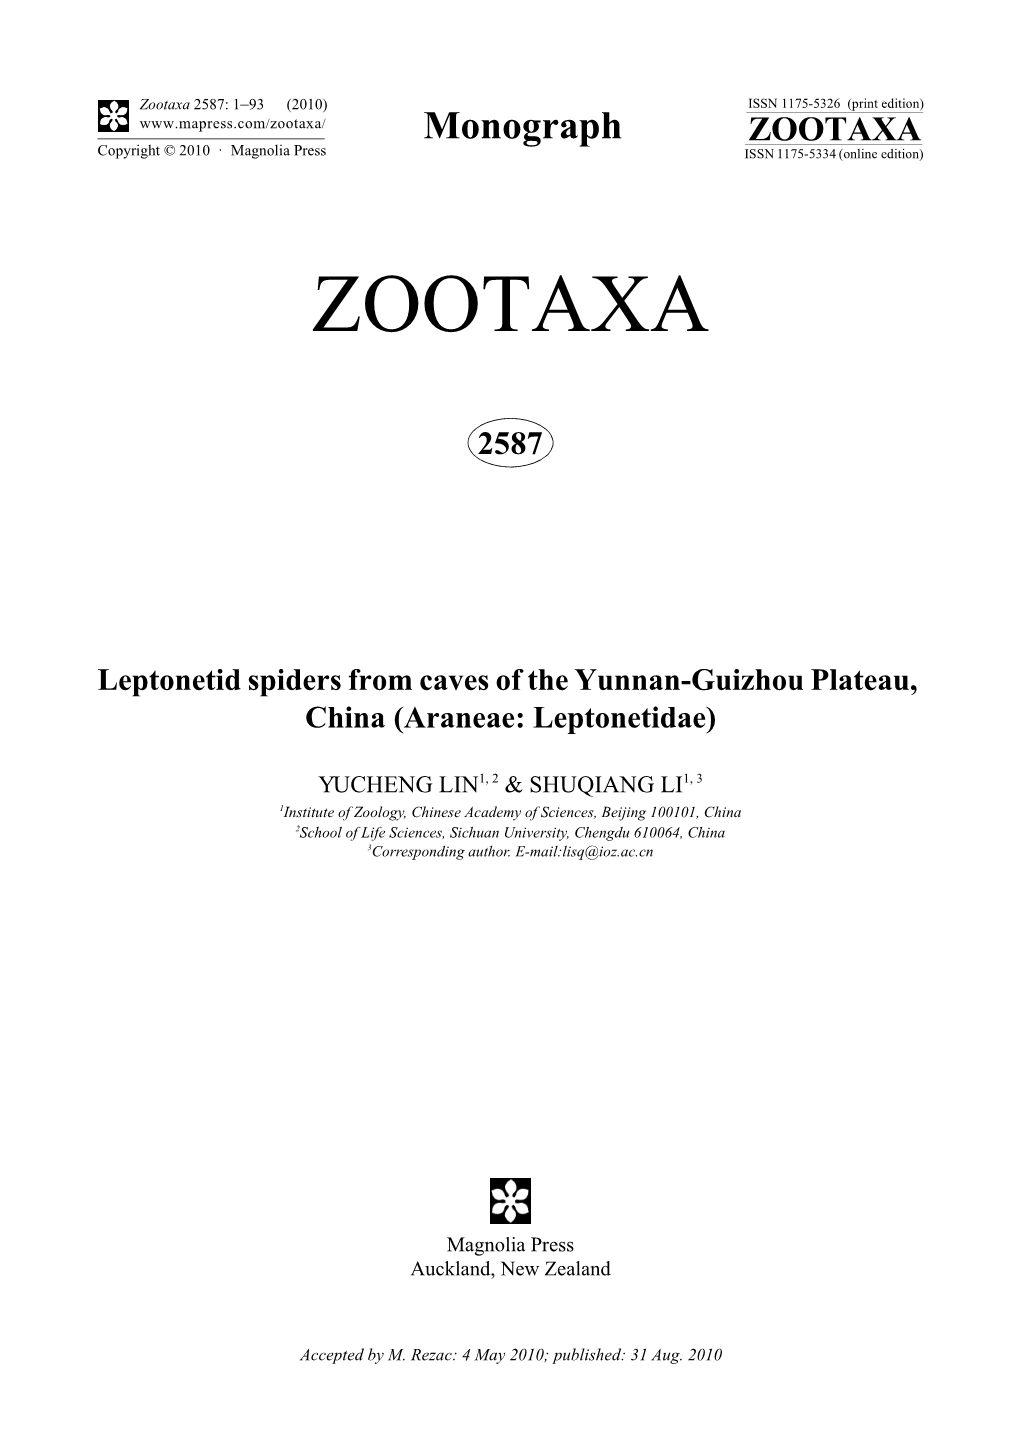 Zootaxa, Leptonetid Spiders from Caves of the Yunnan-Guizhou